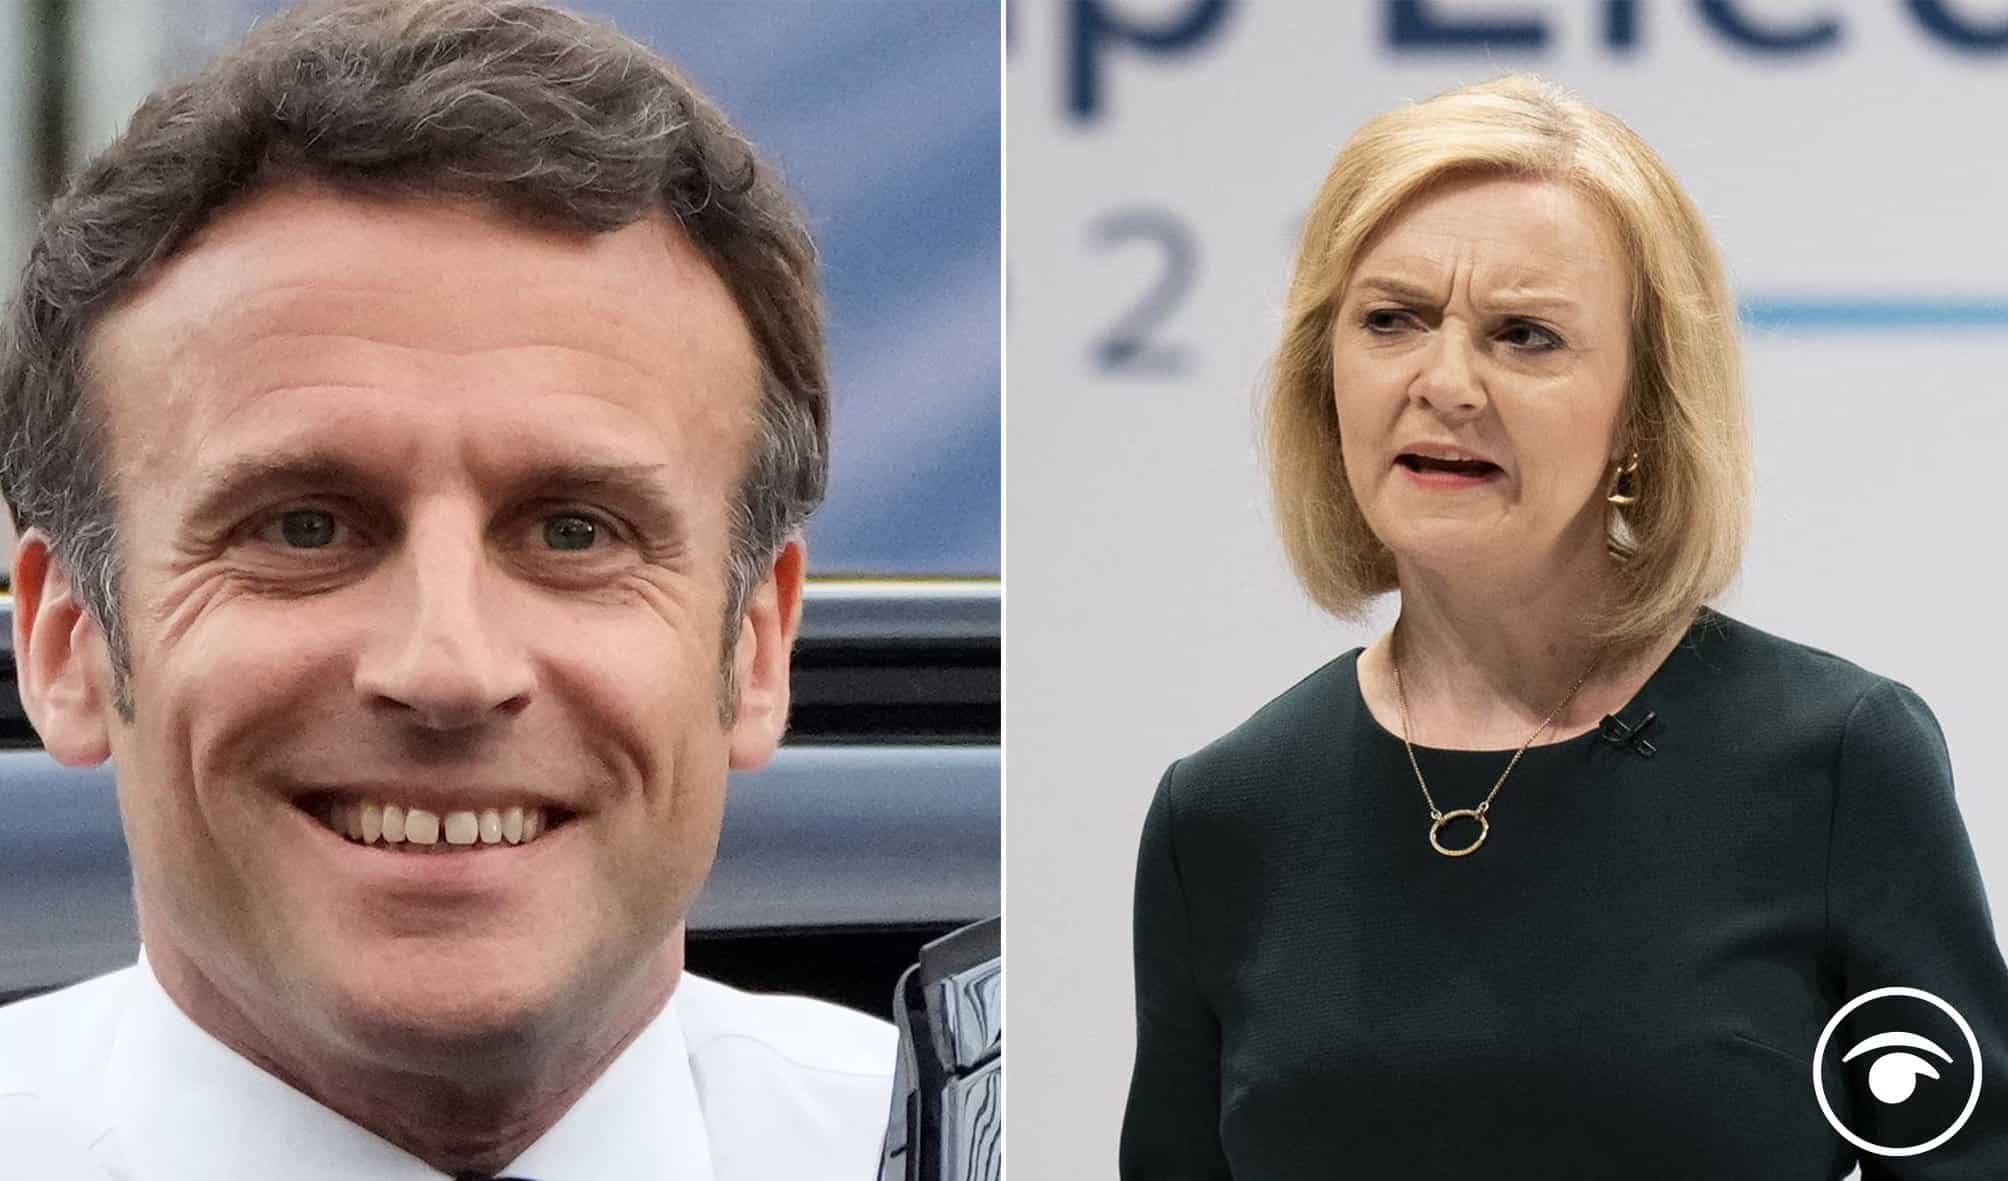 Watch: Macron’s epic response to Liz Truss after she refused to call him a friend